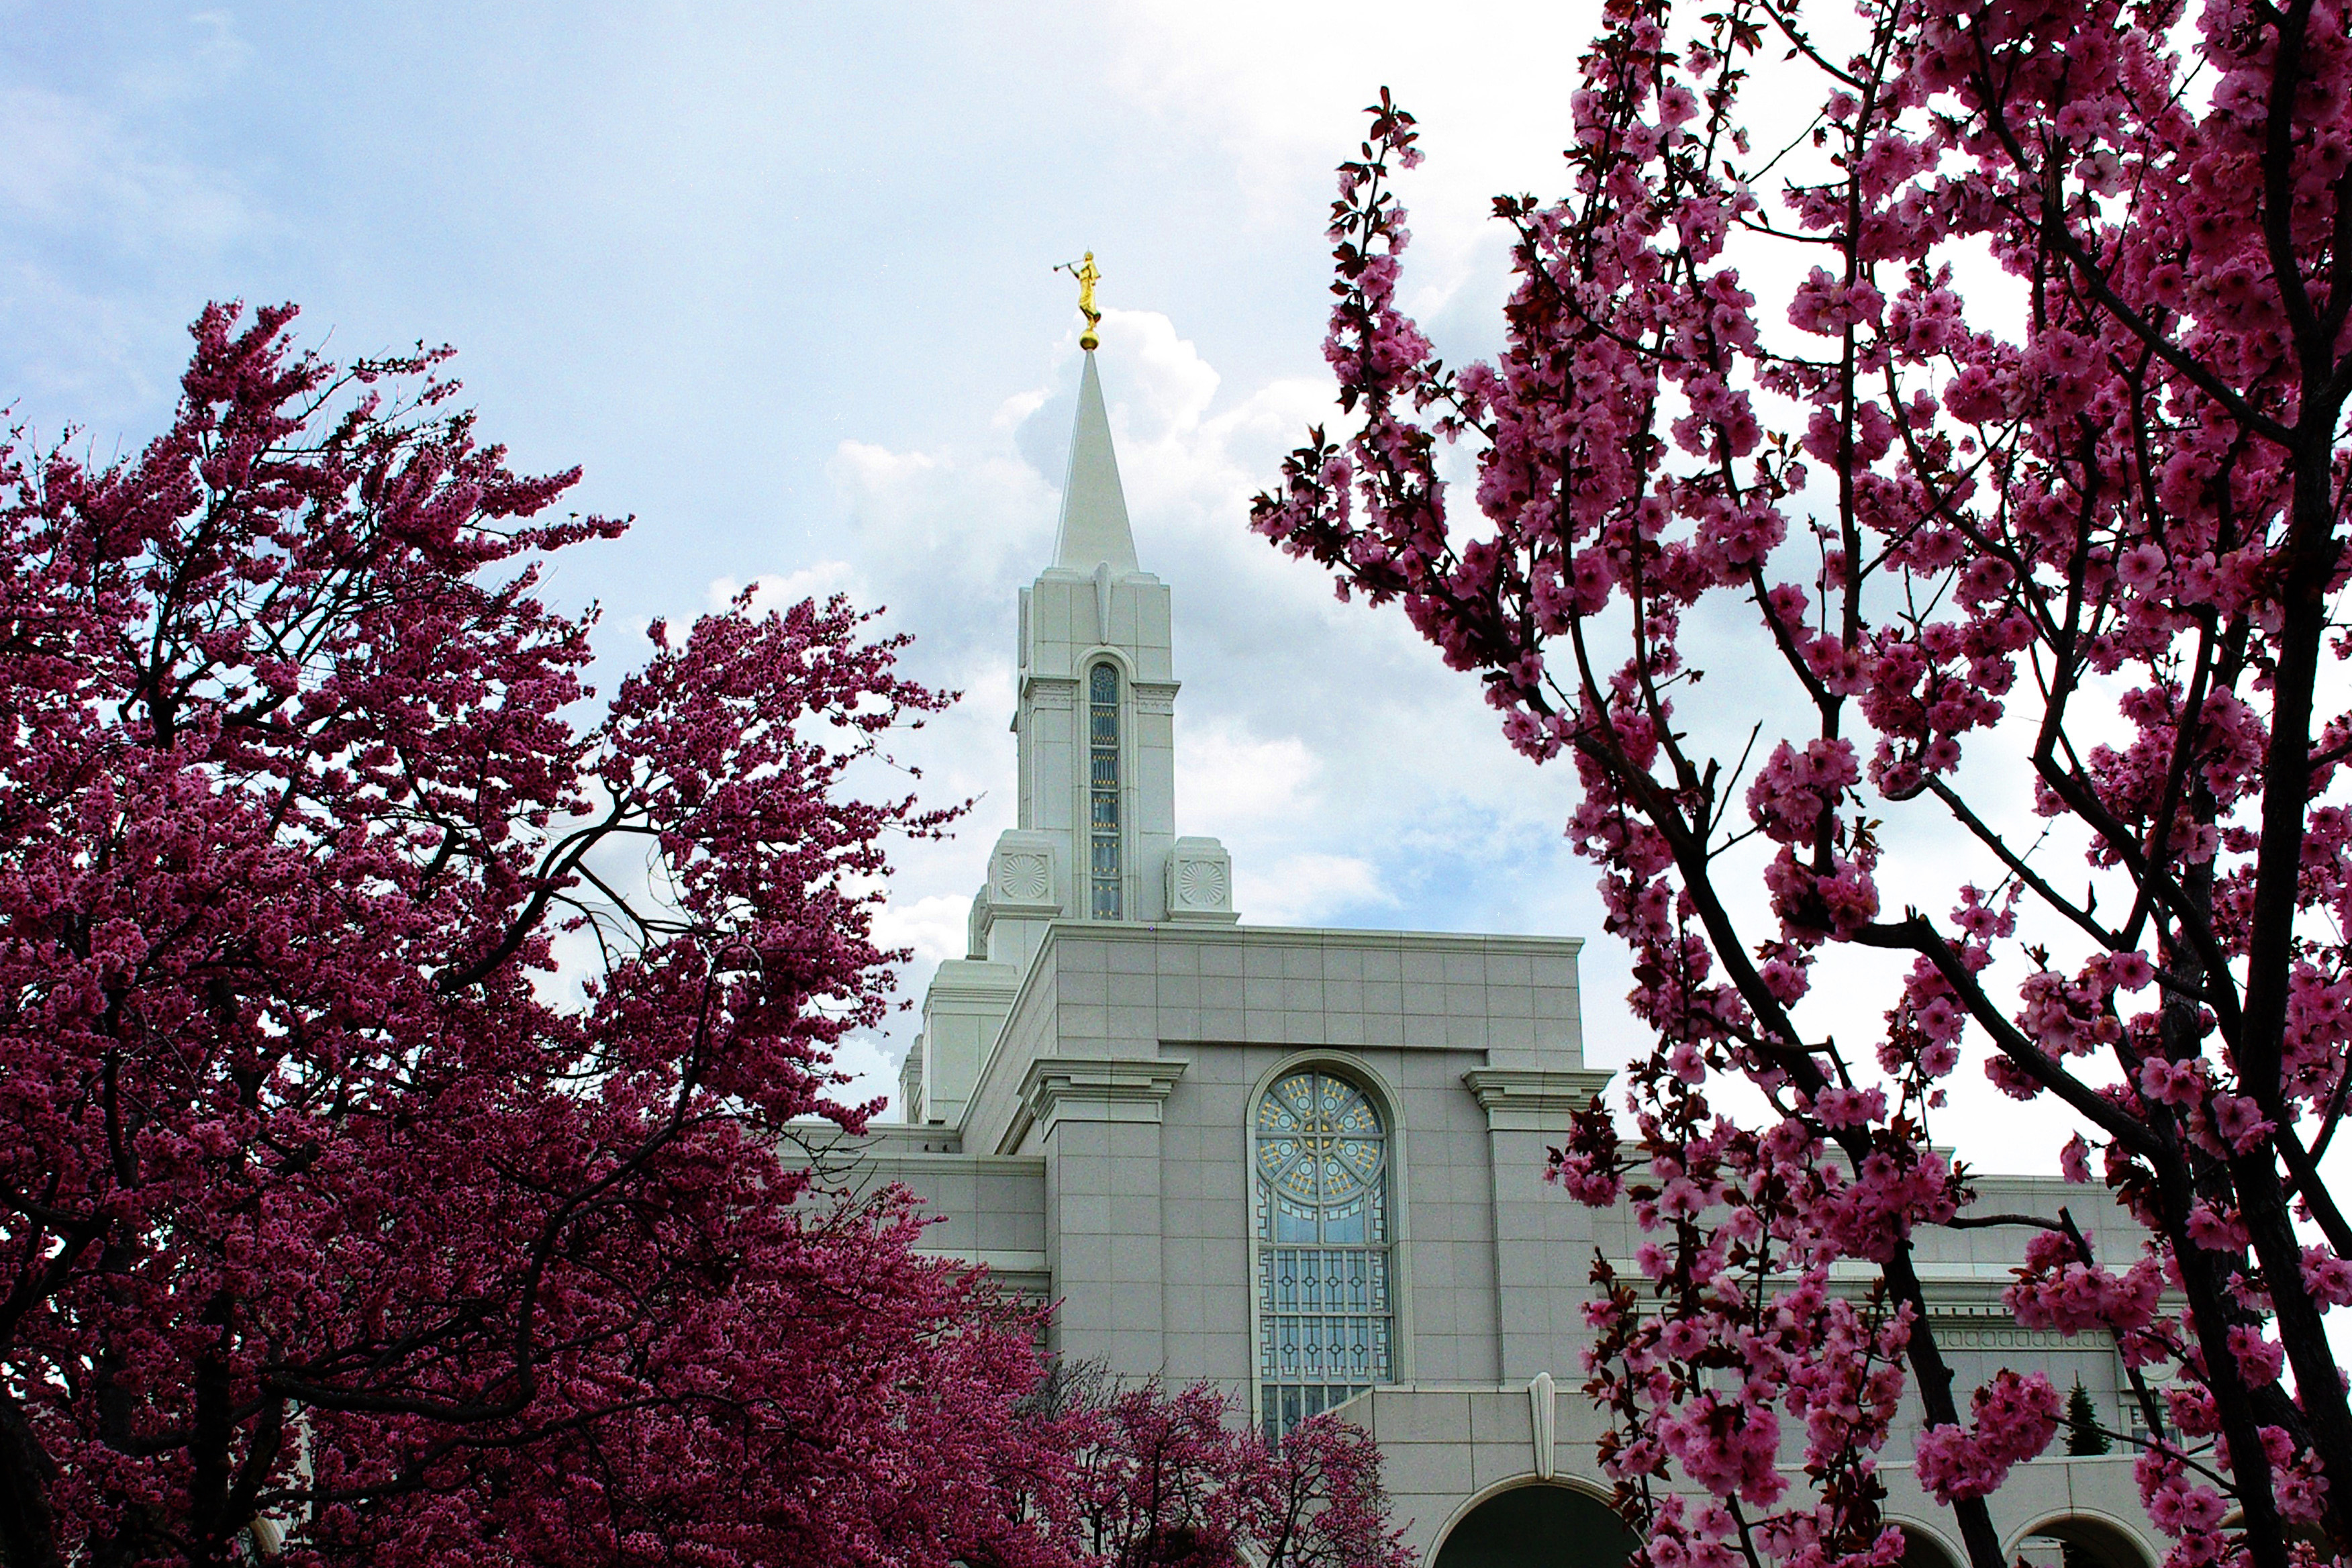 Trees in bloom frame a view of the Bountiful Utah Temple.  